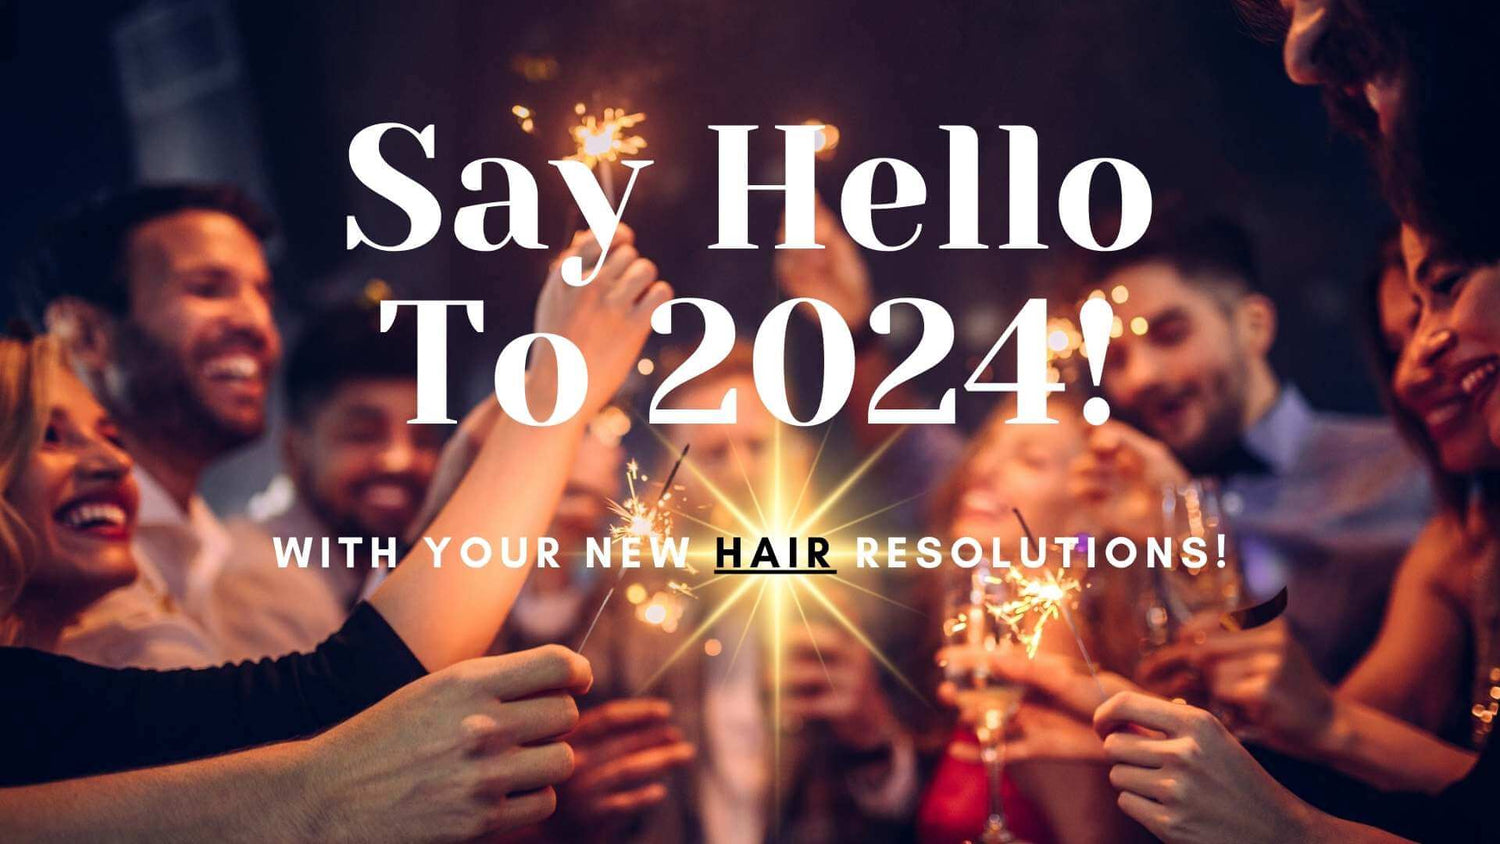 Say Hello To 2024 With Your New Hair Resolutions!